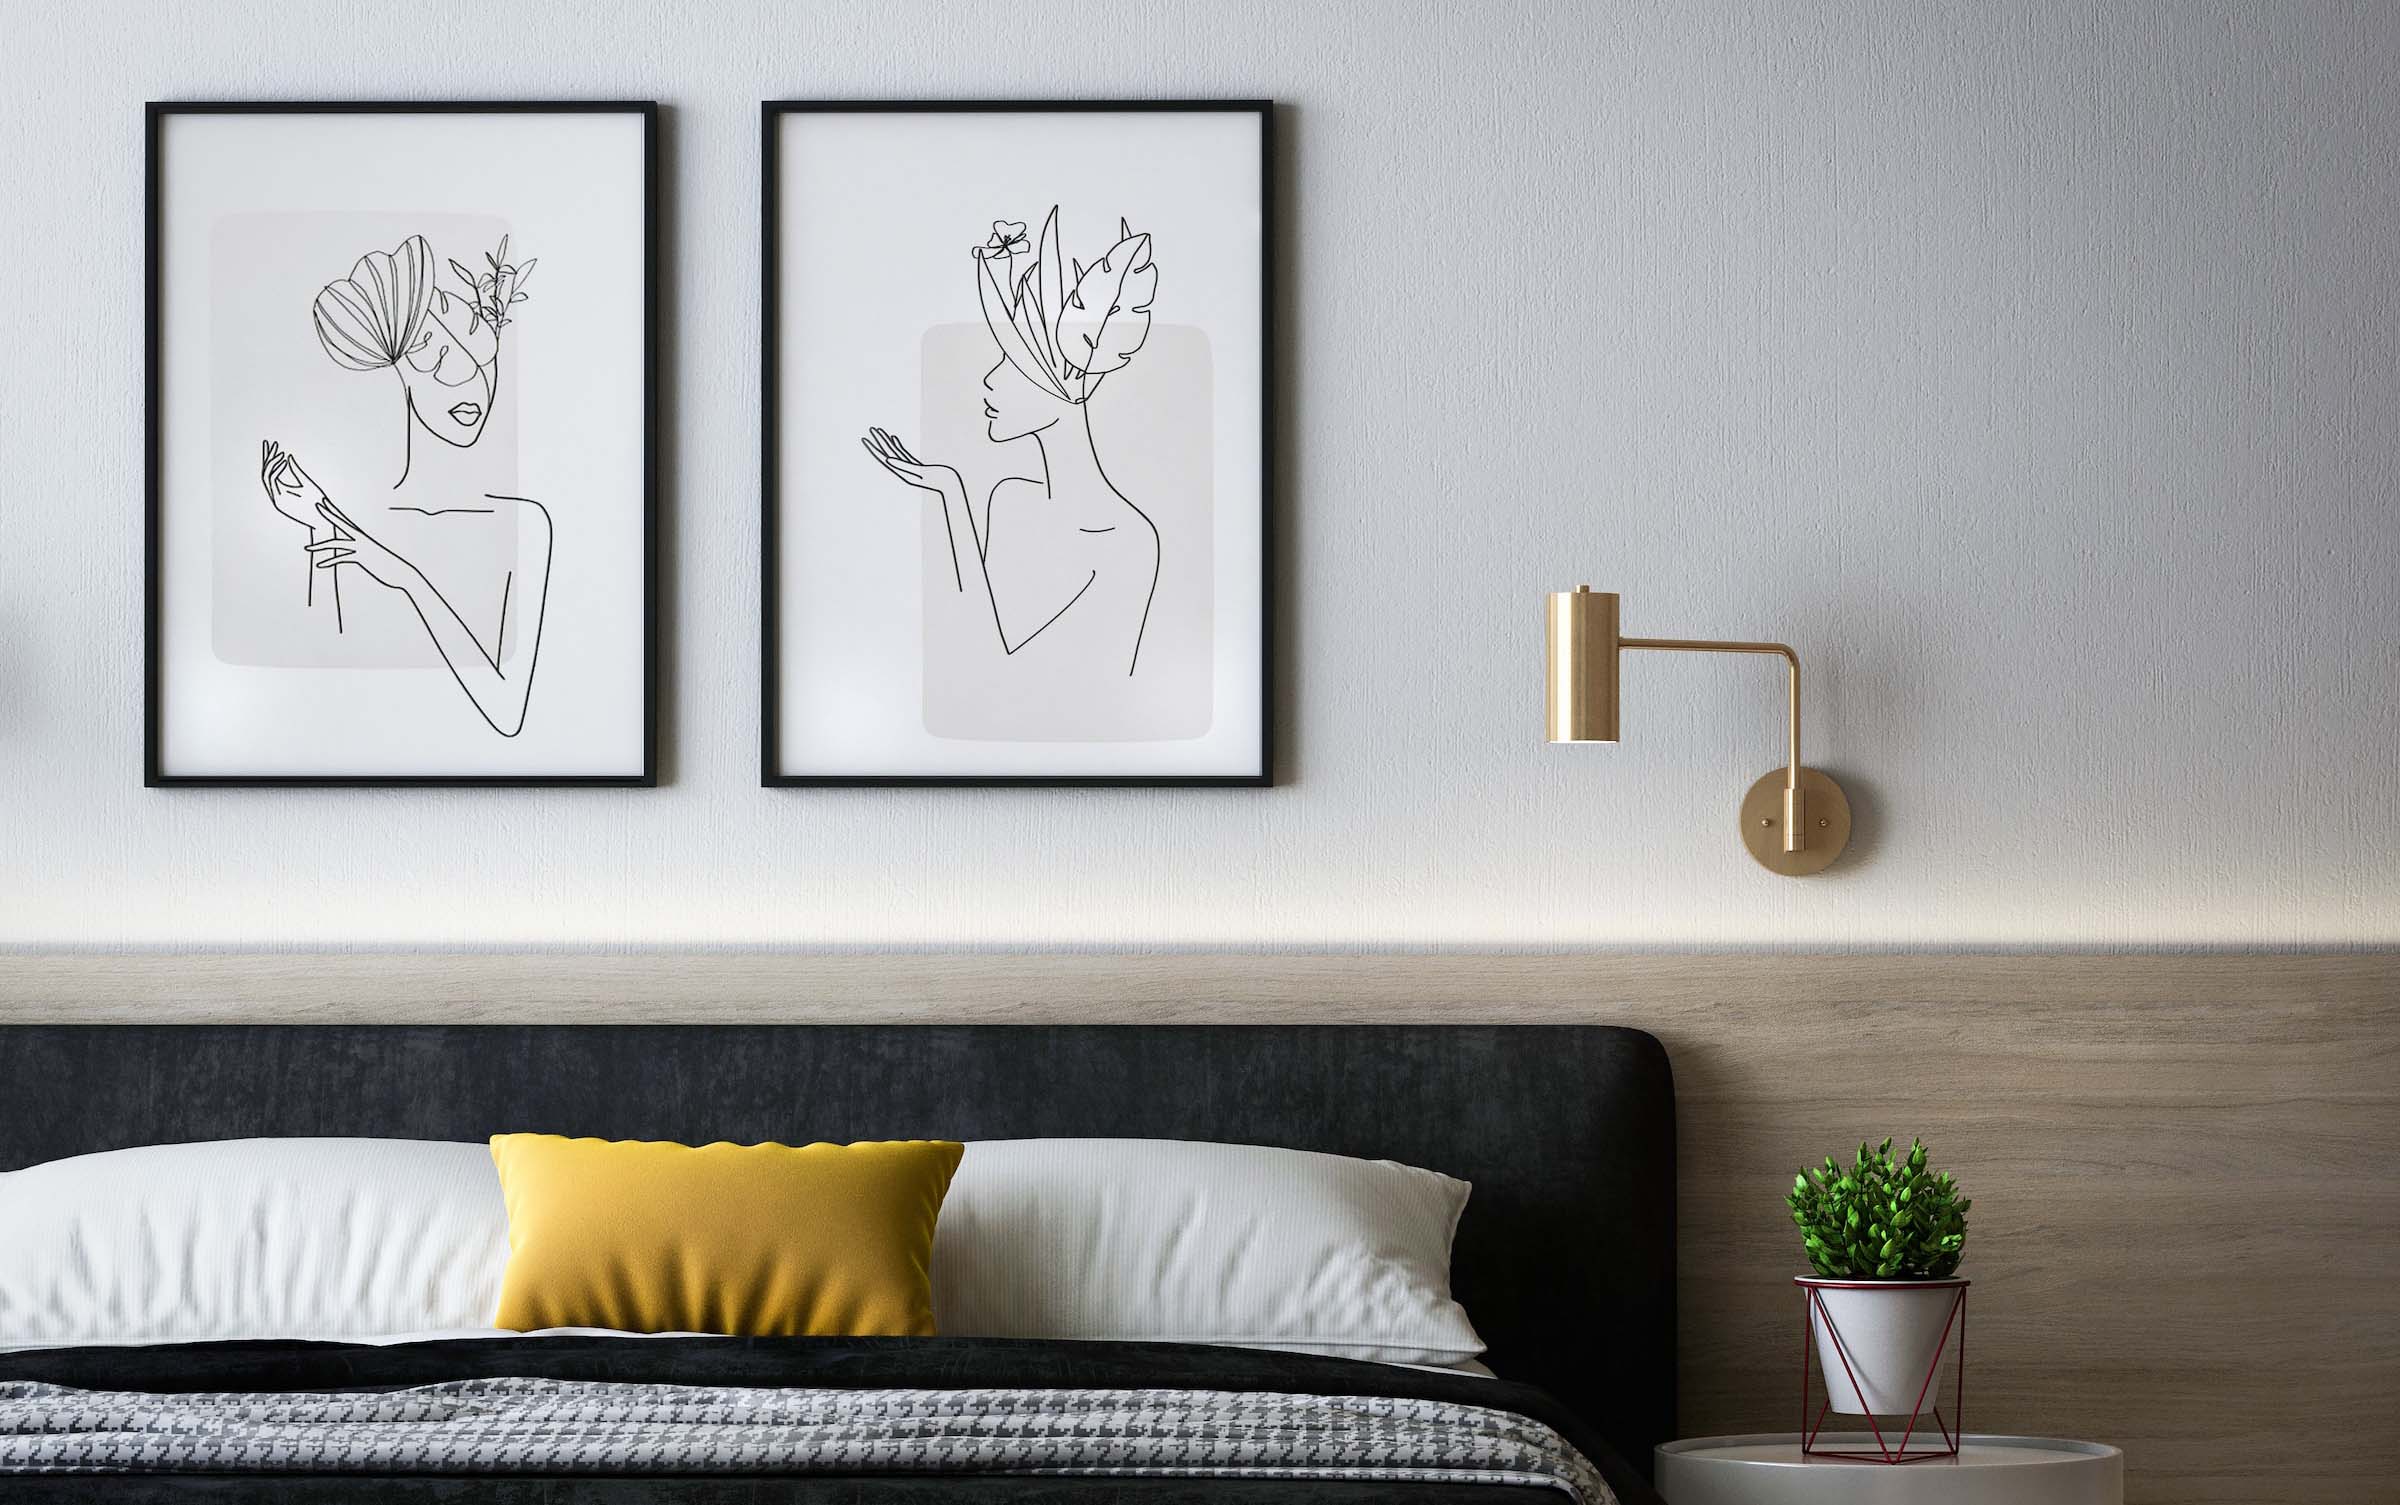 Wall art ideas - transform your living space